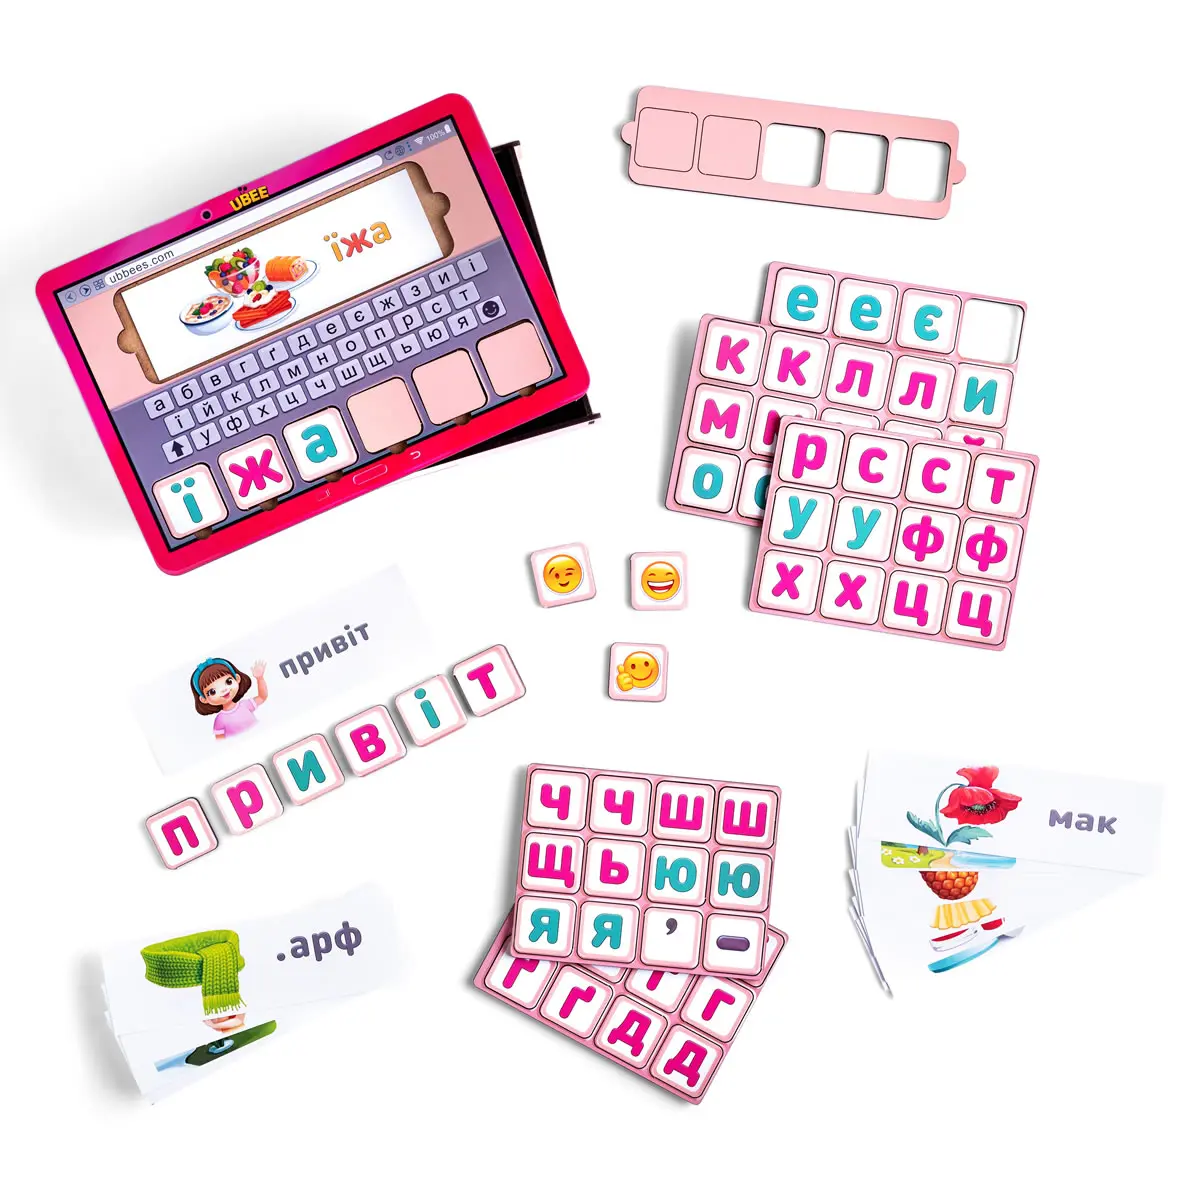 Board for girls "Assemble words using pictures" ukrainian language